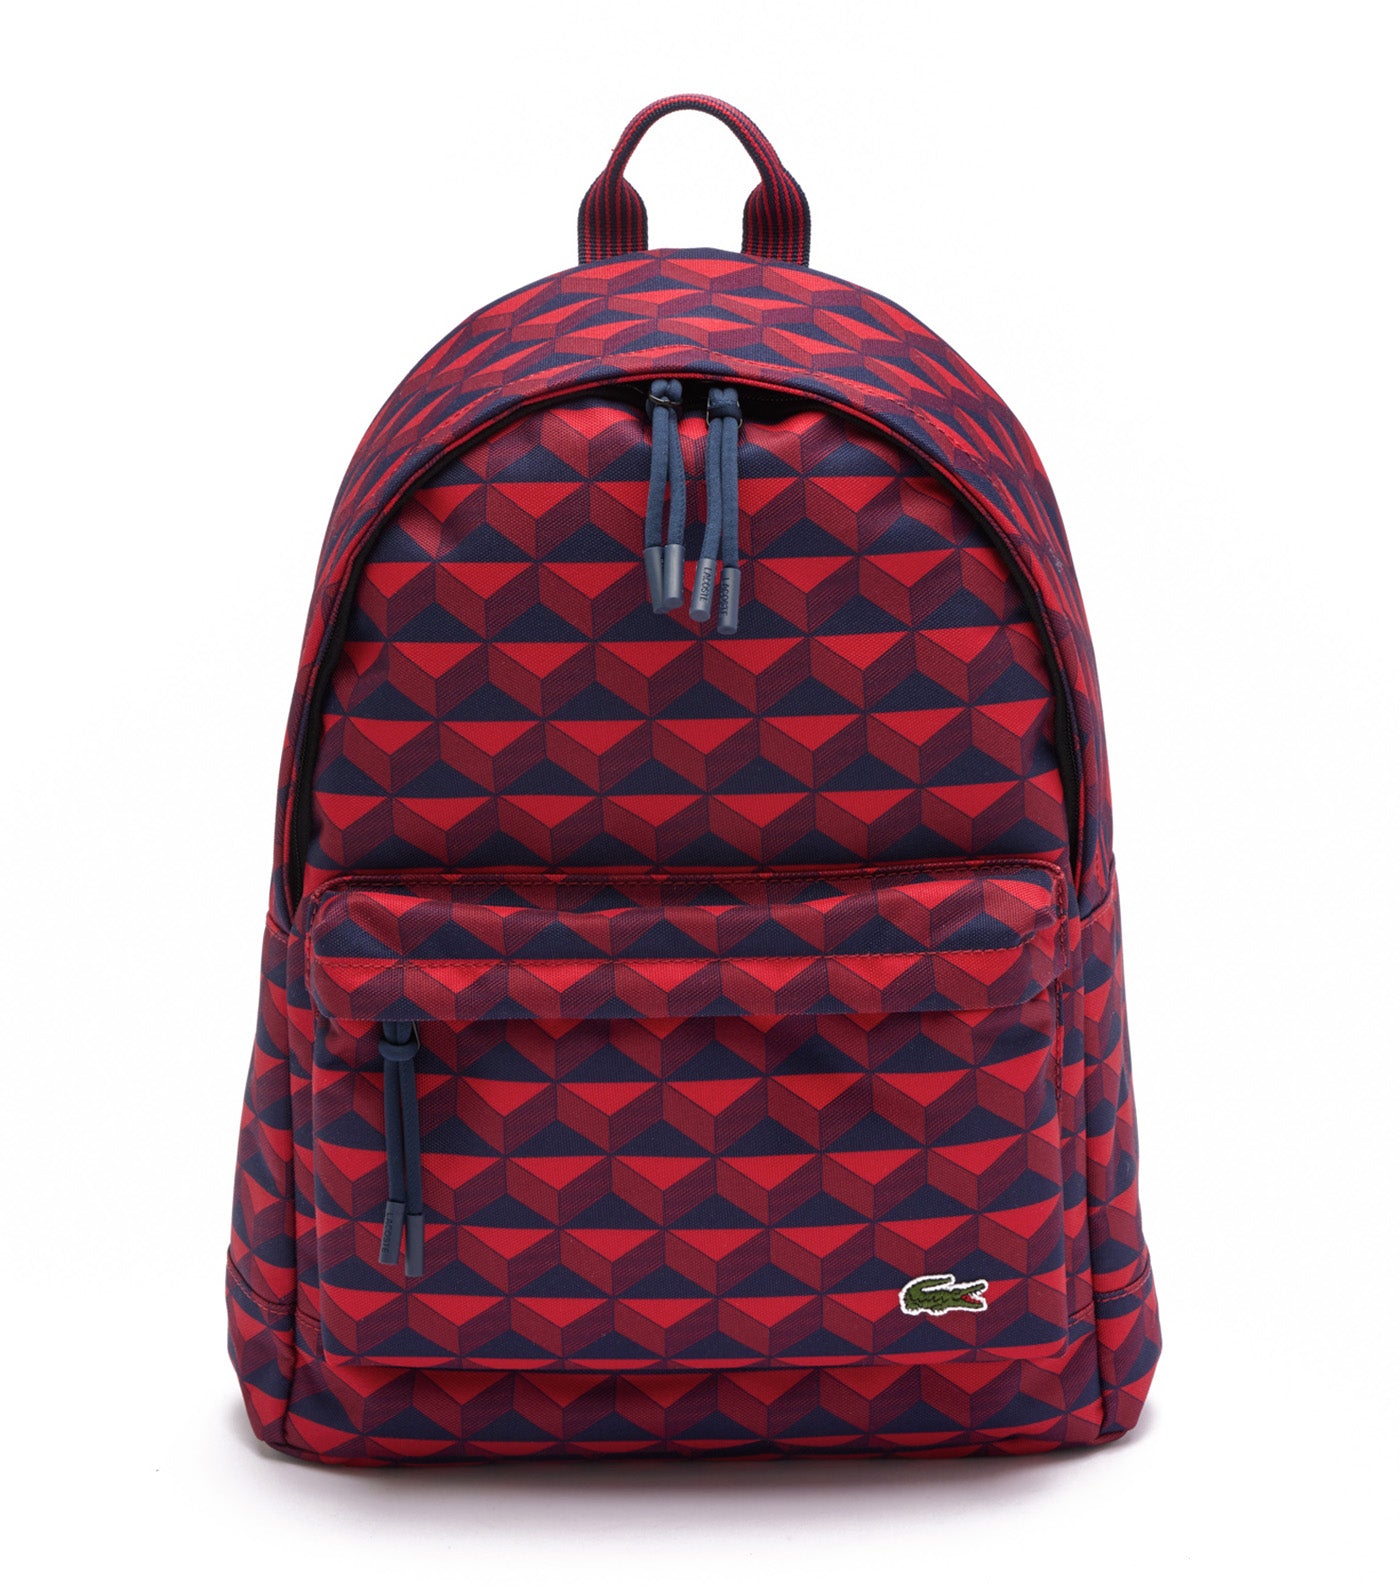 Neocroc Backpack with Laptop Pocket Robert Georges Marine